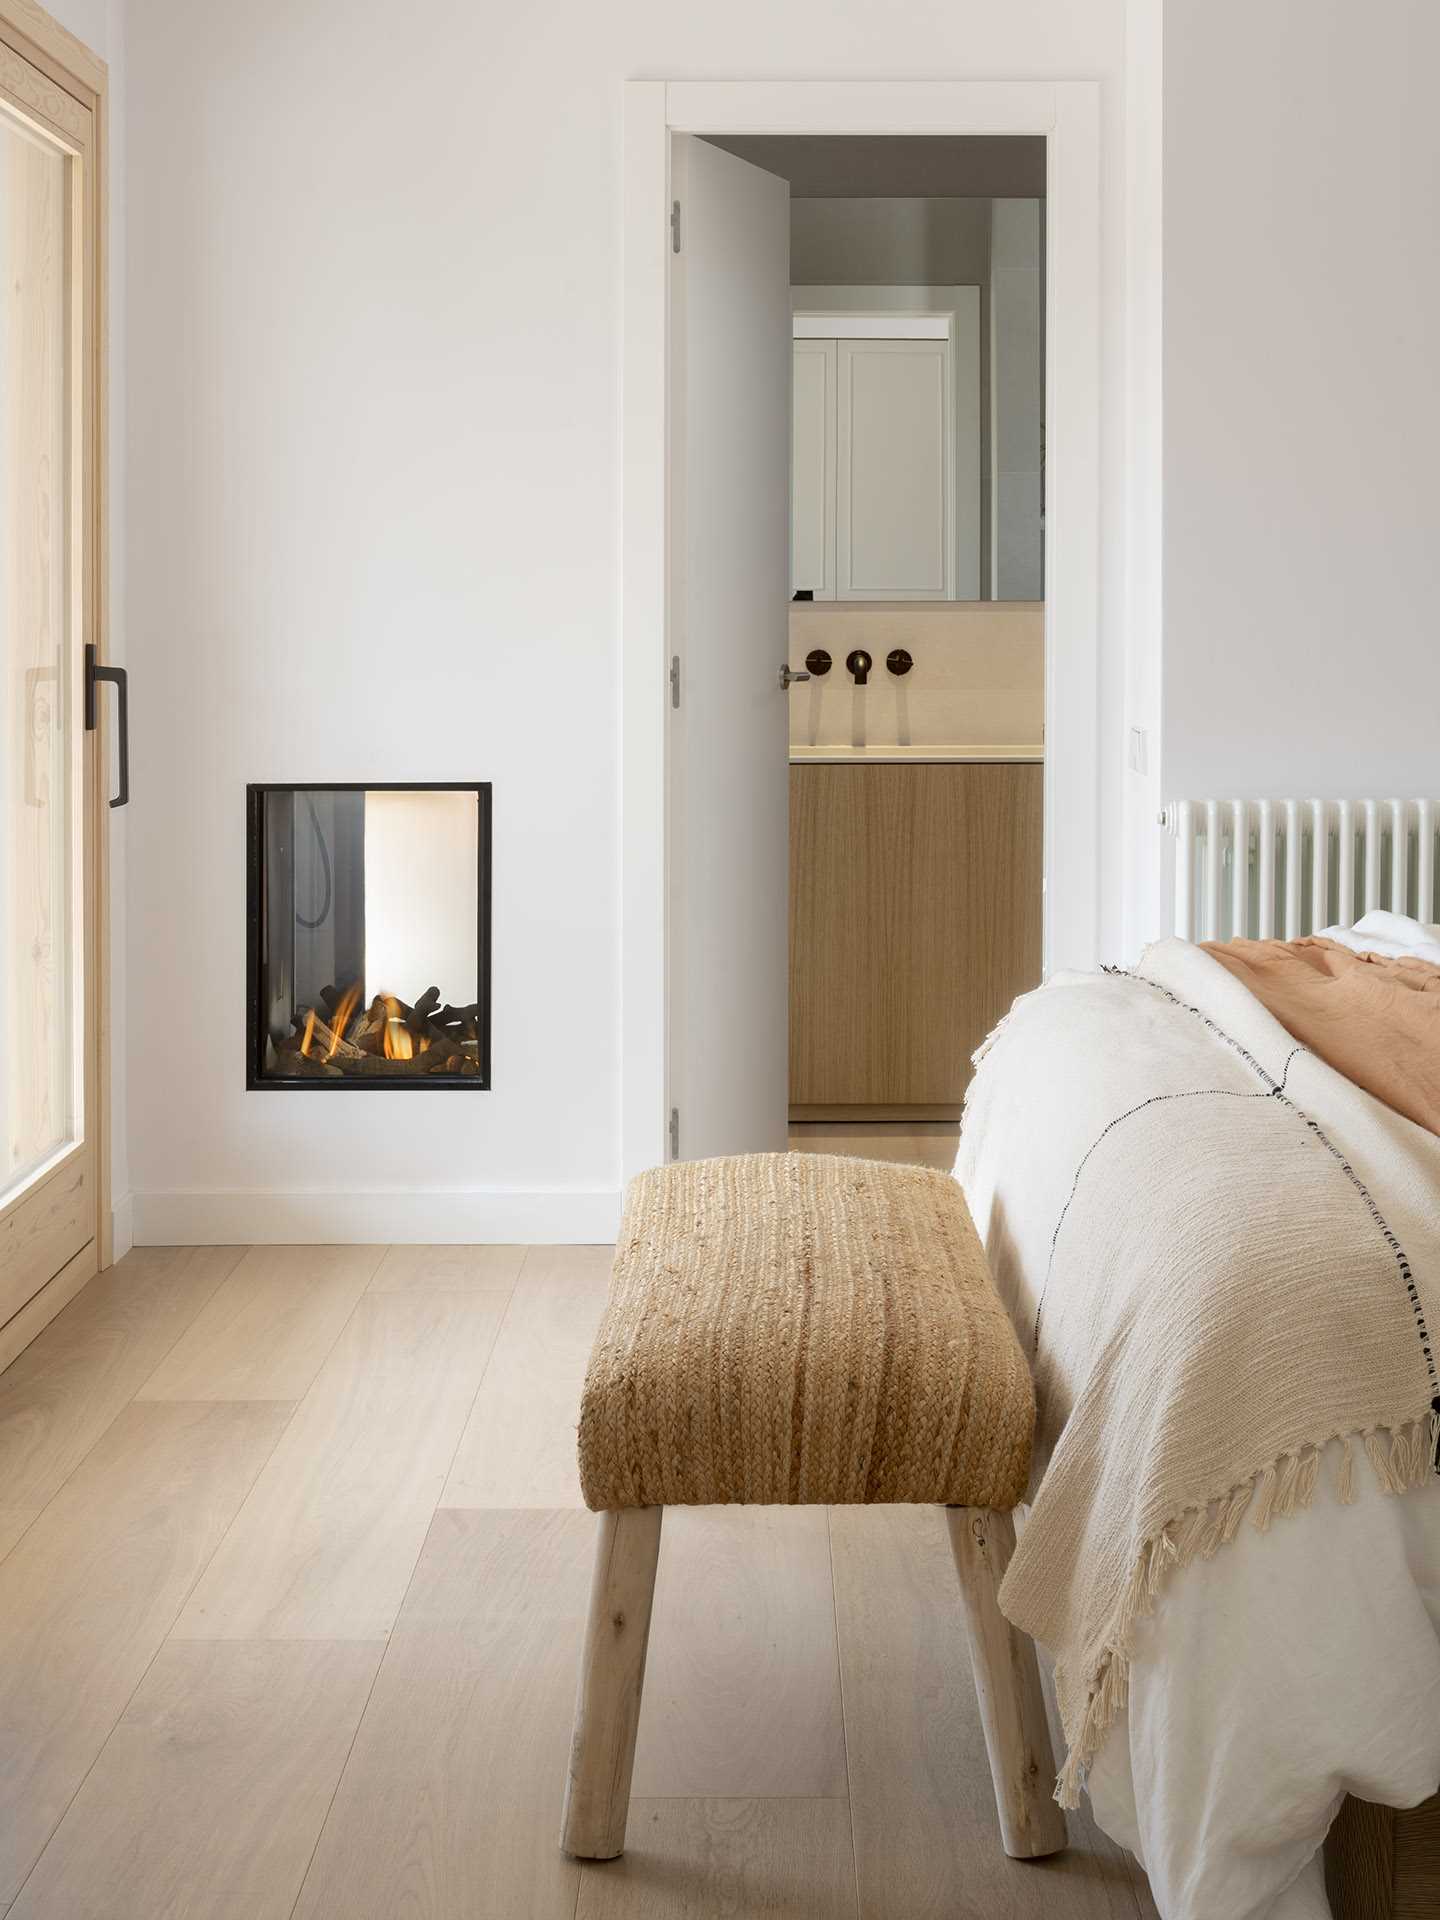 This modern bedroom has a double-sided fireplace that can be enjoyed from the bedroom and from within the shower in the en-suite bathroom.